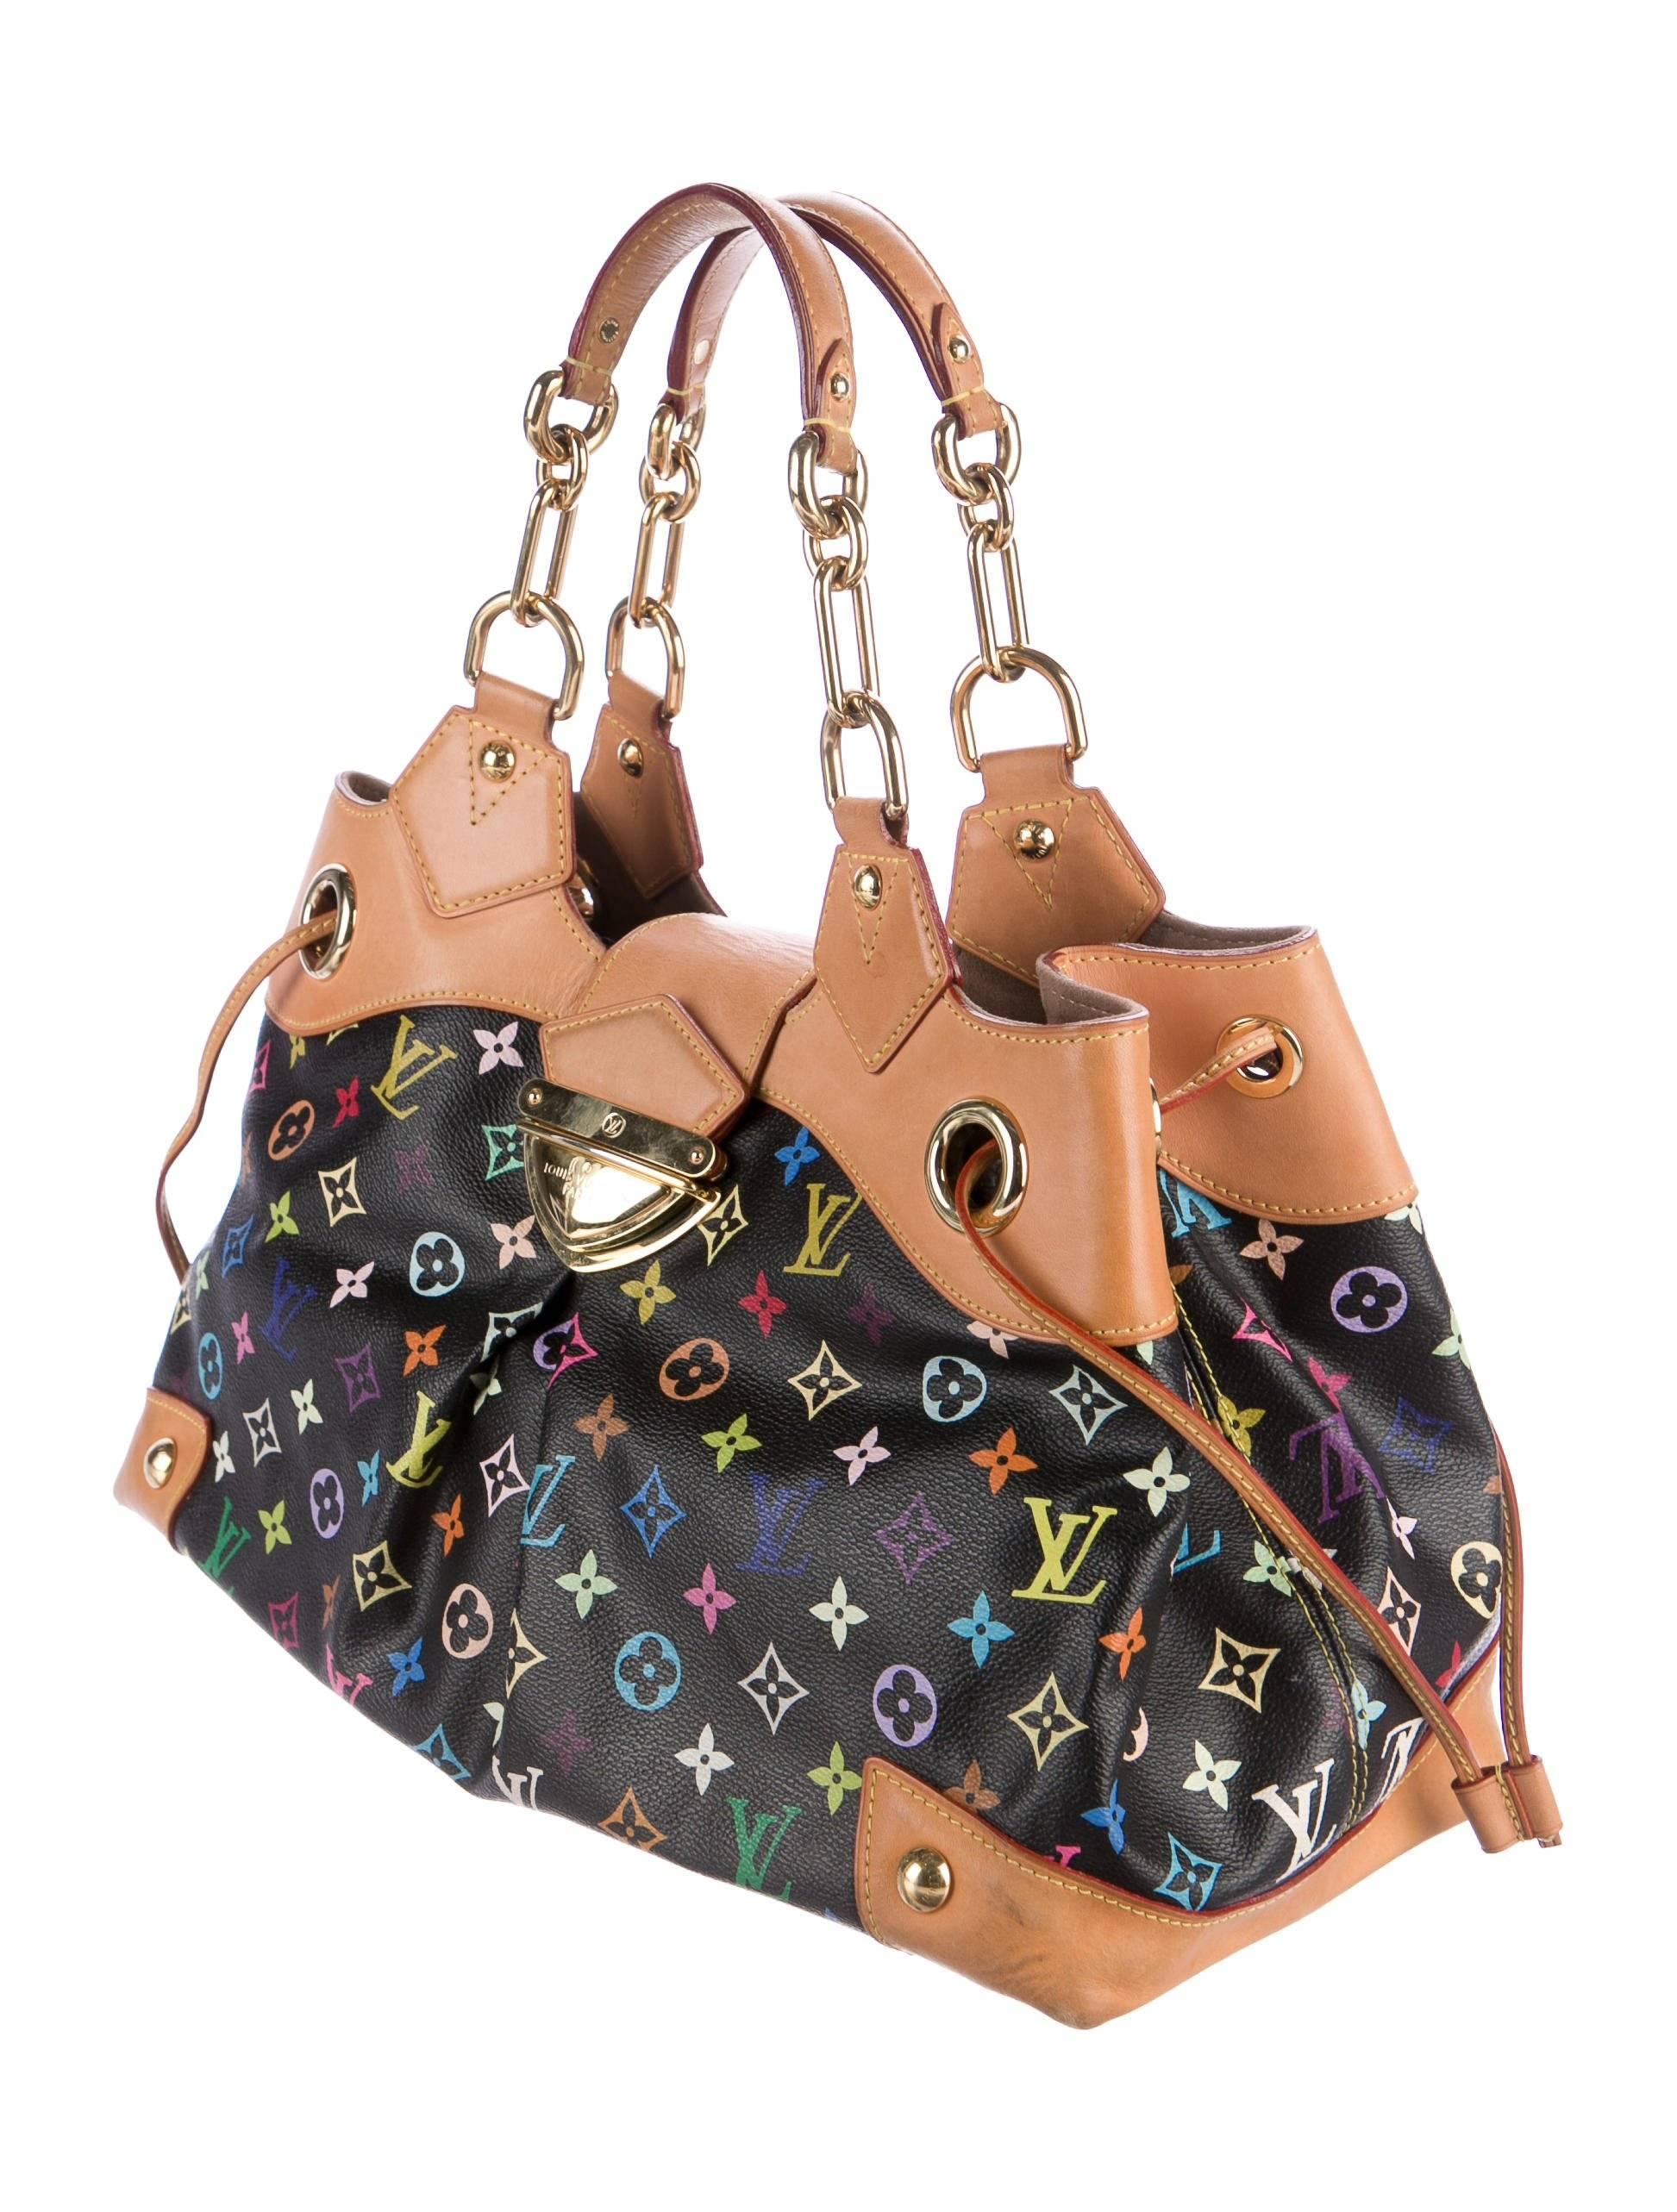 Limited Edition. From the Takashi Murakami Collection. Black and multicolor monogram coated canvas Louis Vuitton Multicolore Ursula bag with brass hardware, tan vachetta leather trim, dual flat shoulder straps with chain-link accents, taupe